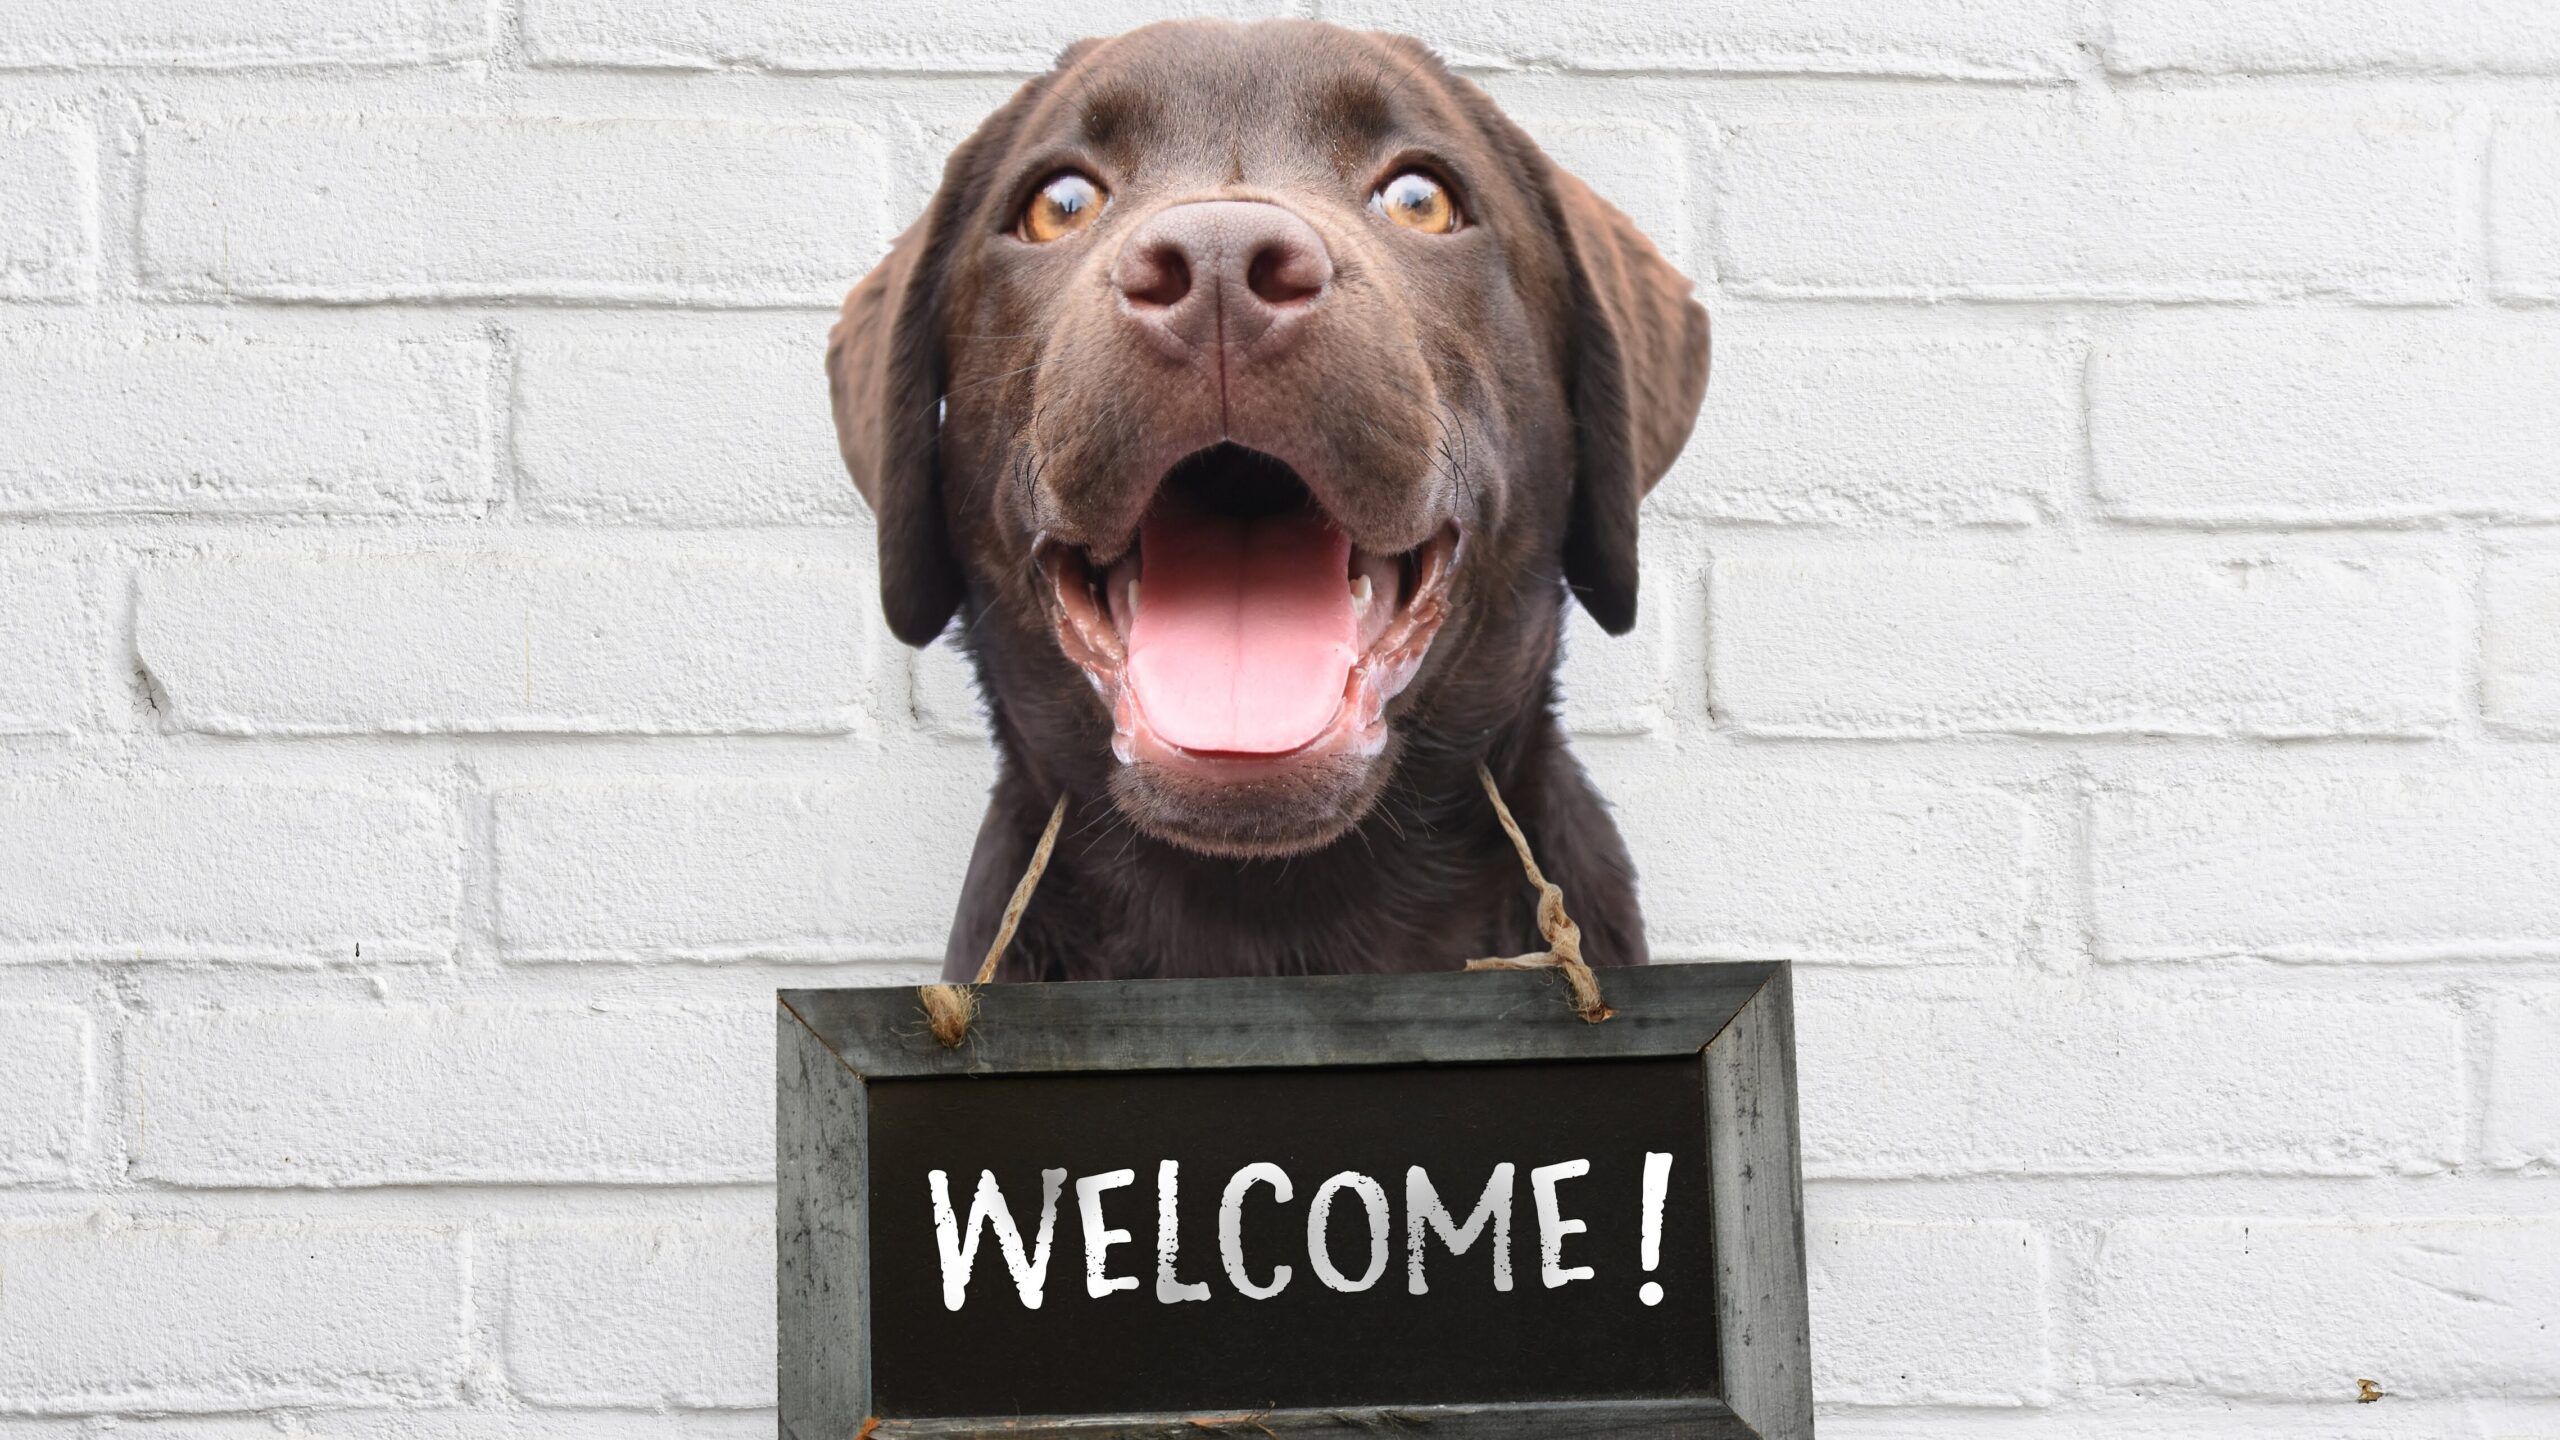 Happy dog with chalkboard with welcome text says hello welcome we’re open against white brick outdoor wall